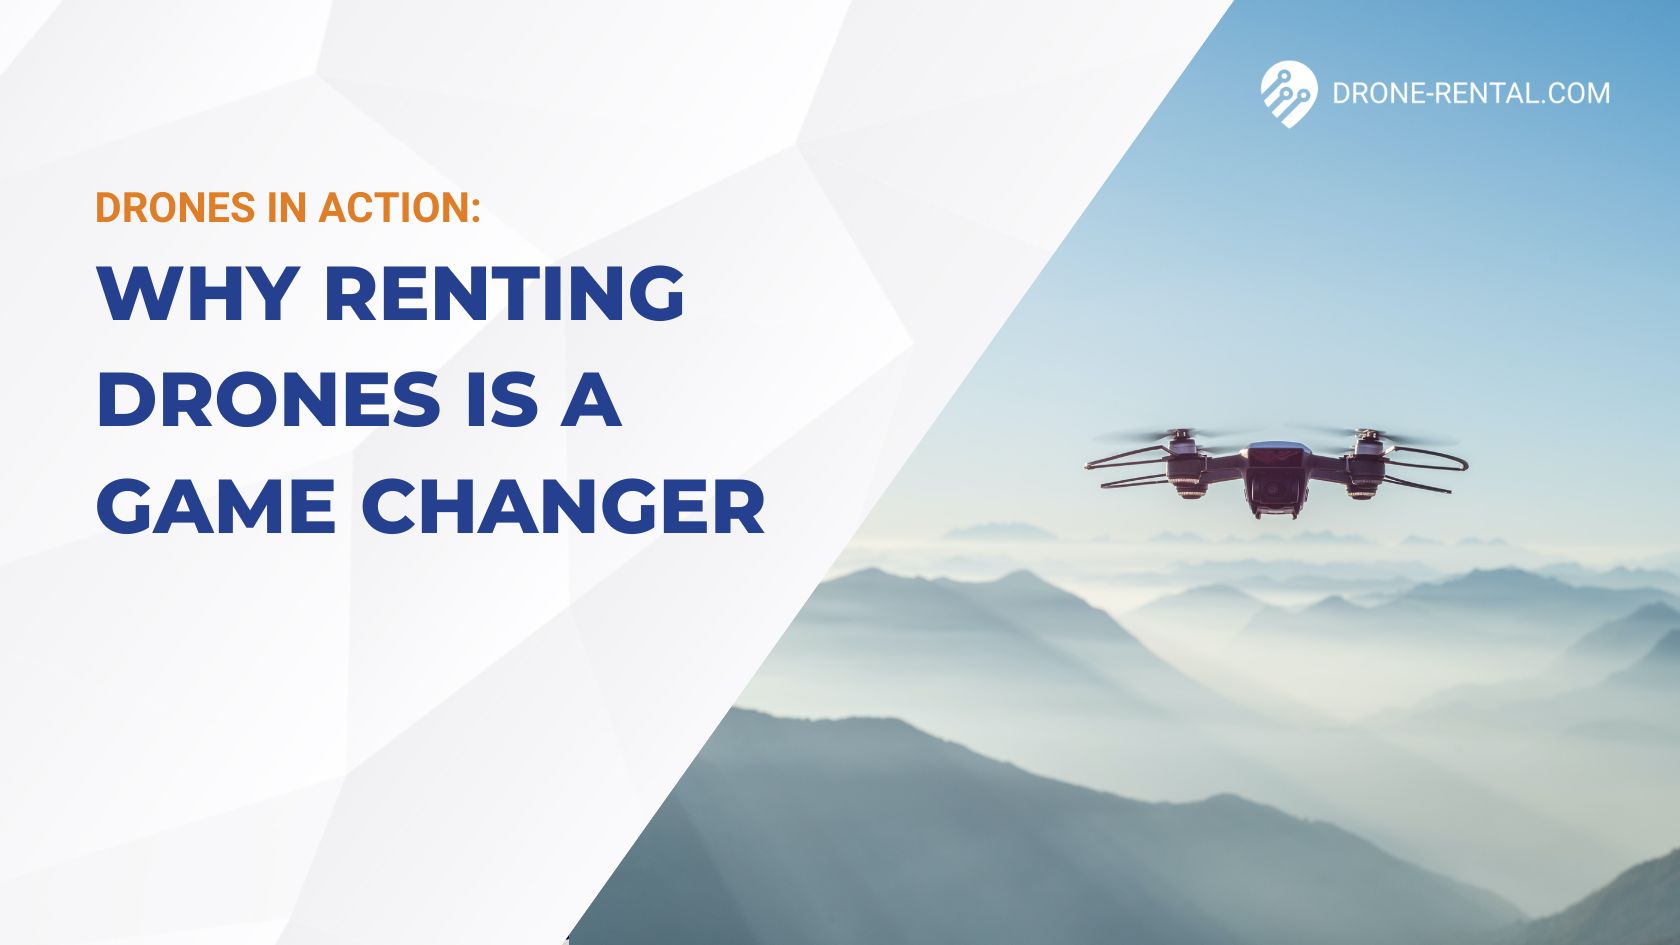 Why renting drones is a game changer